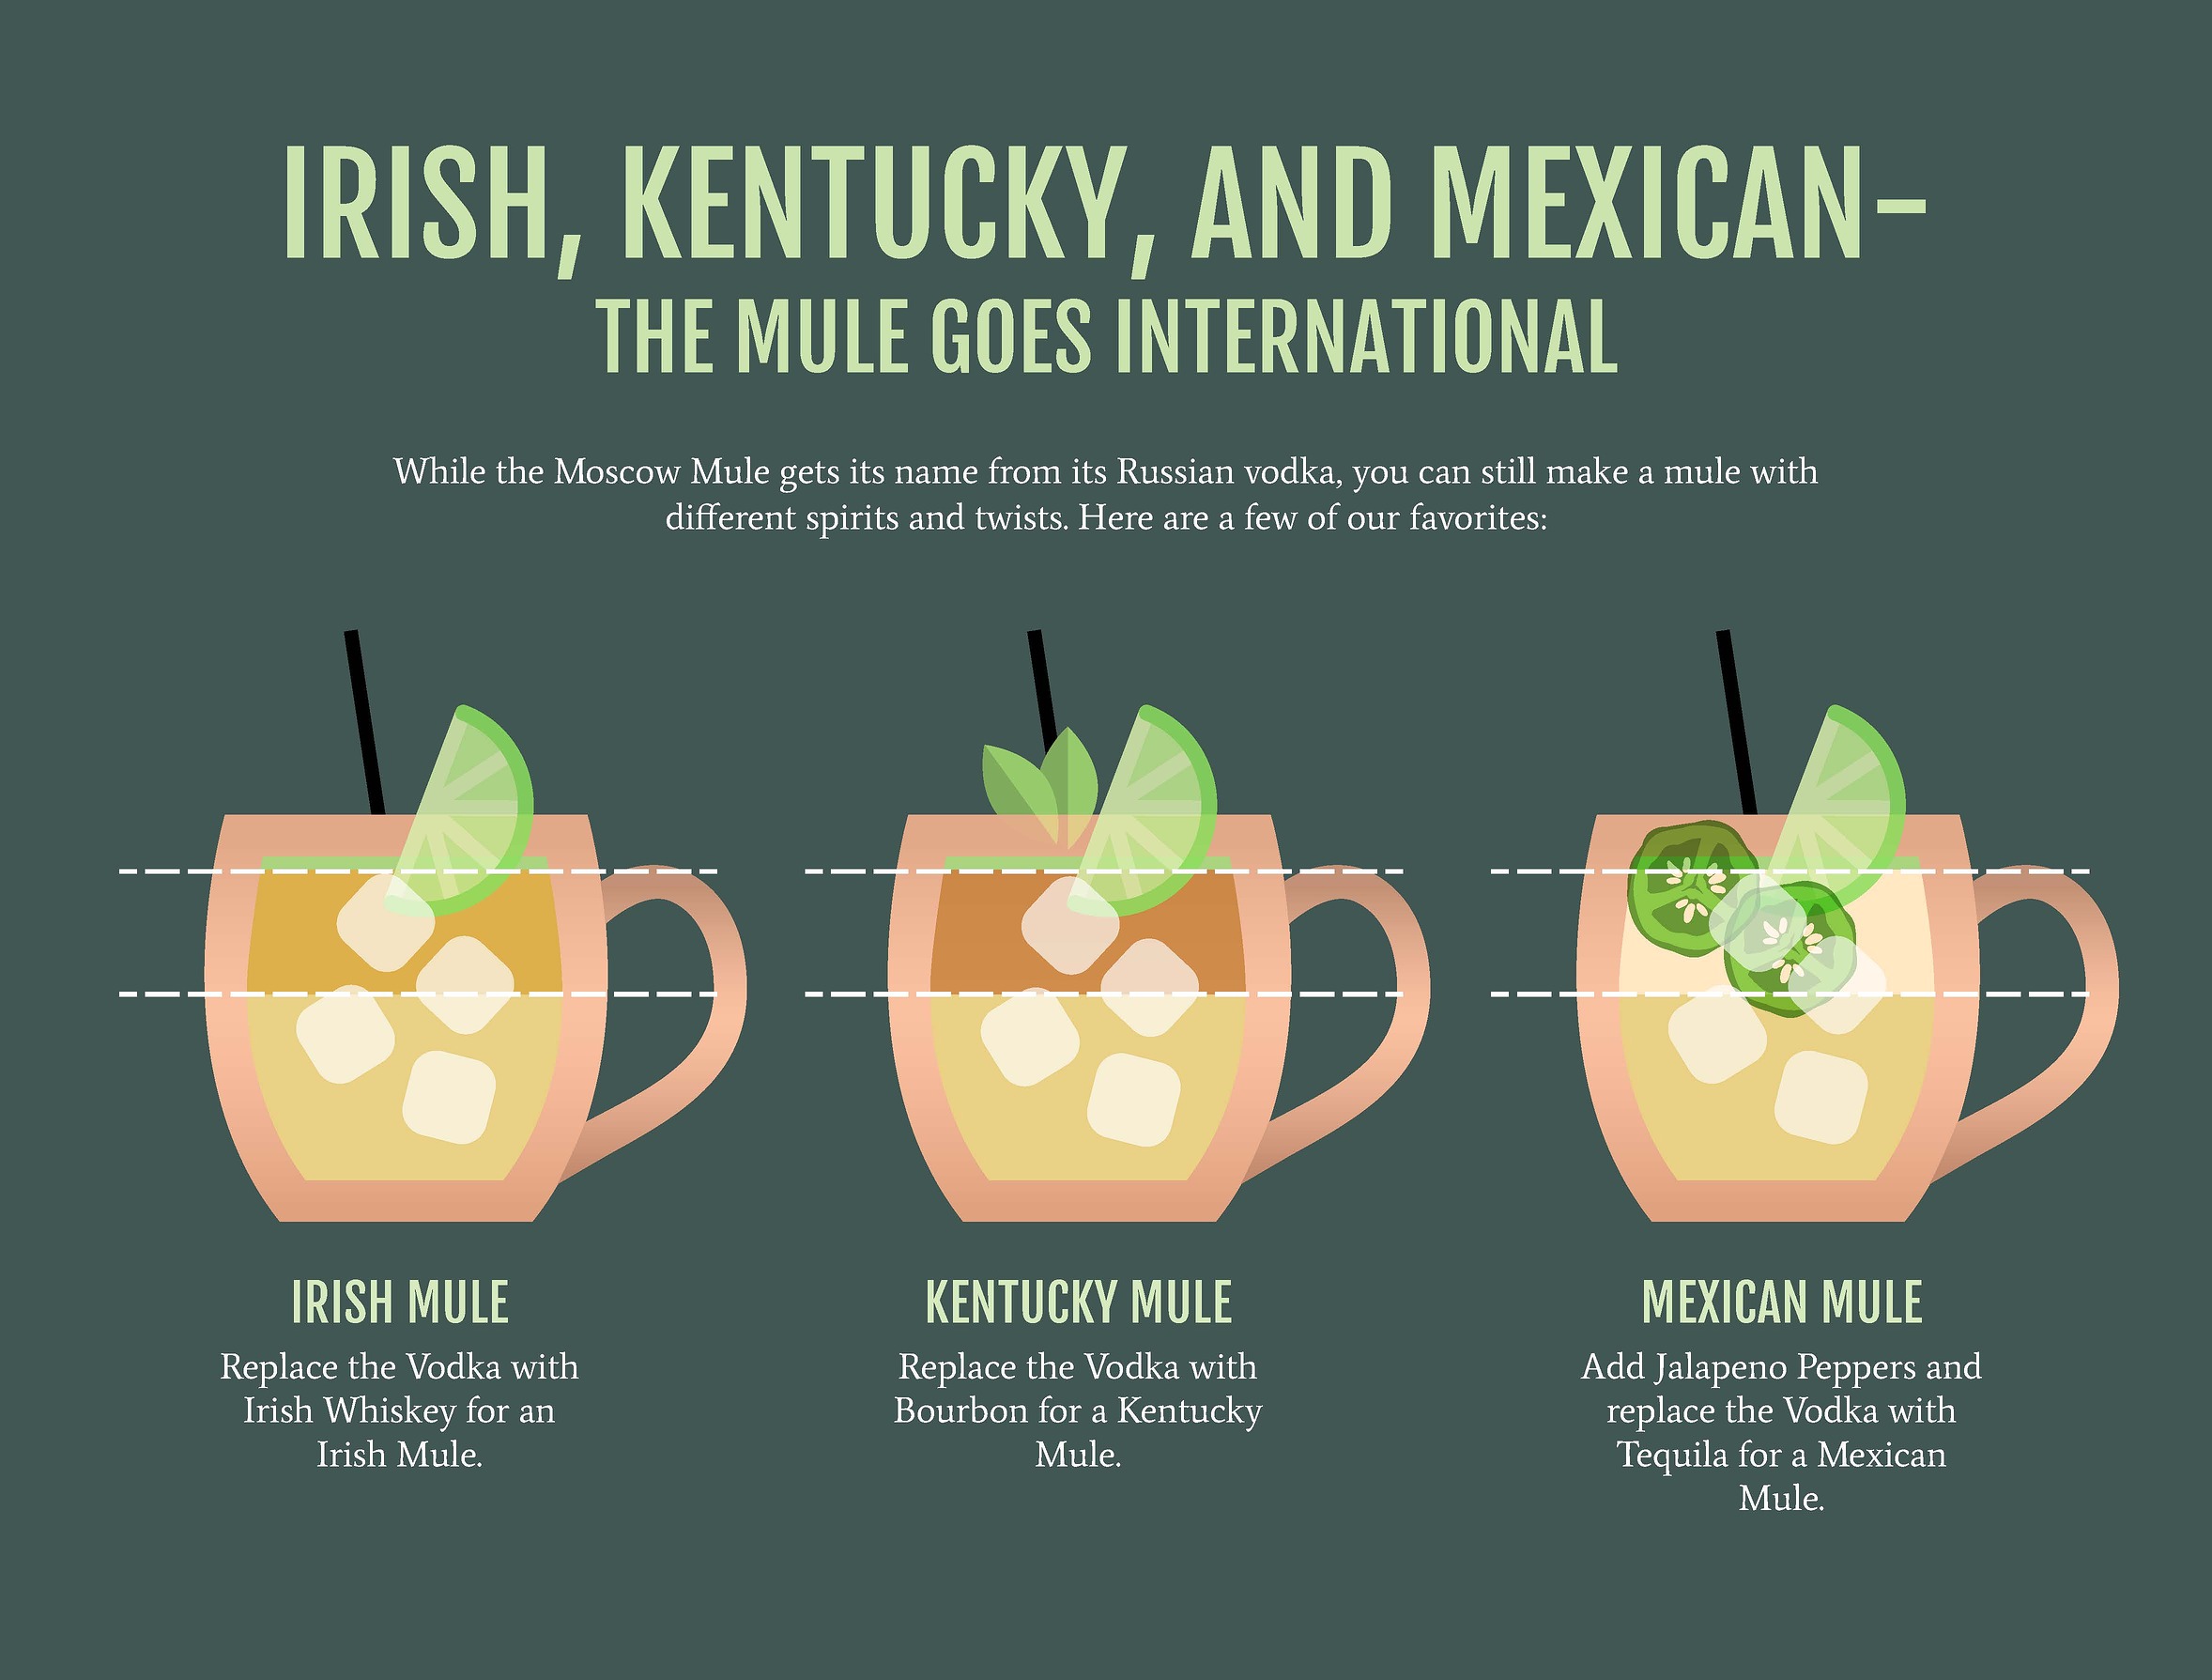 Moscow mule goes international - Infographic